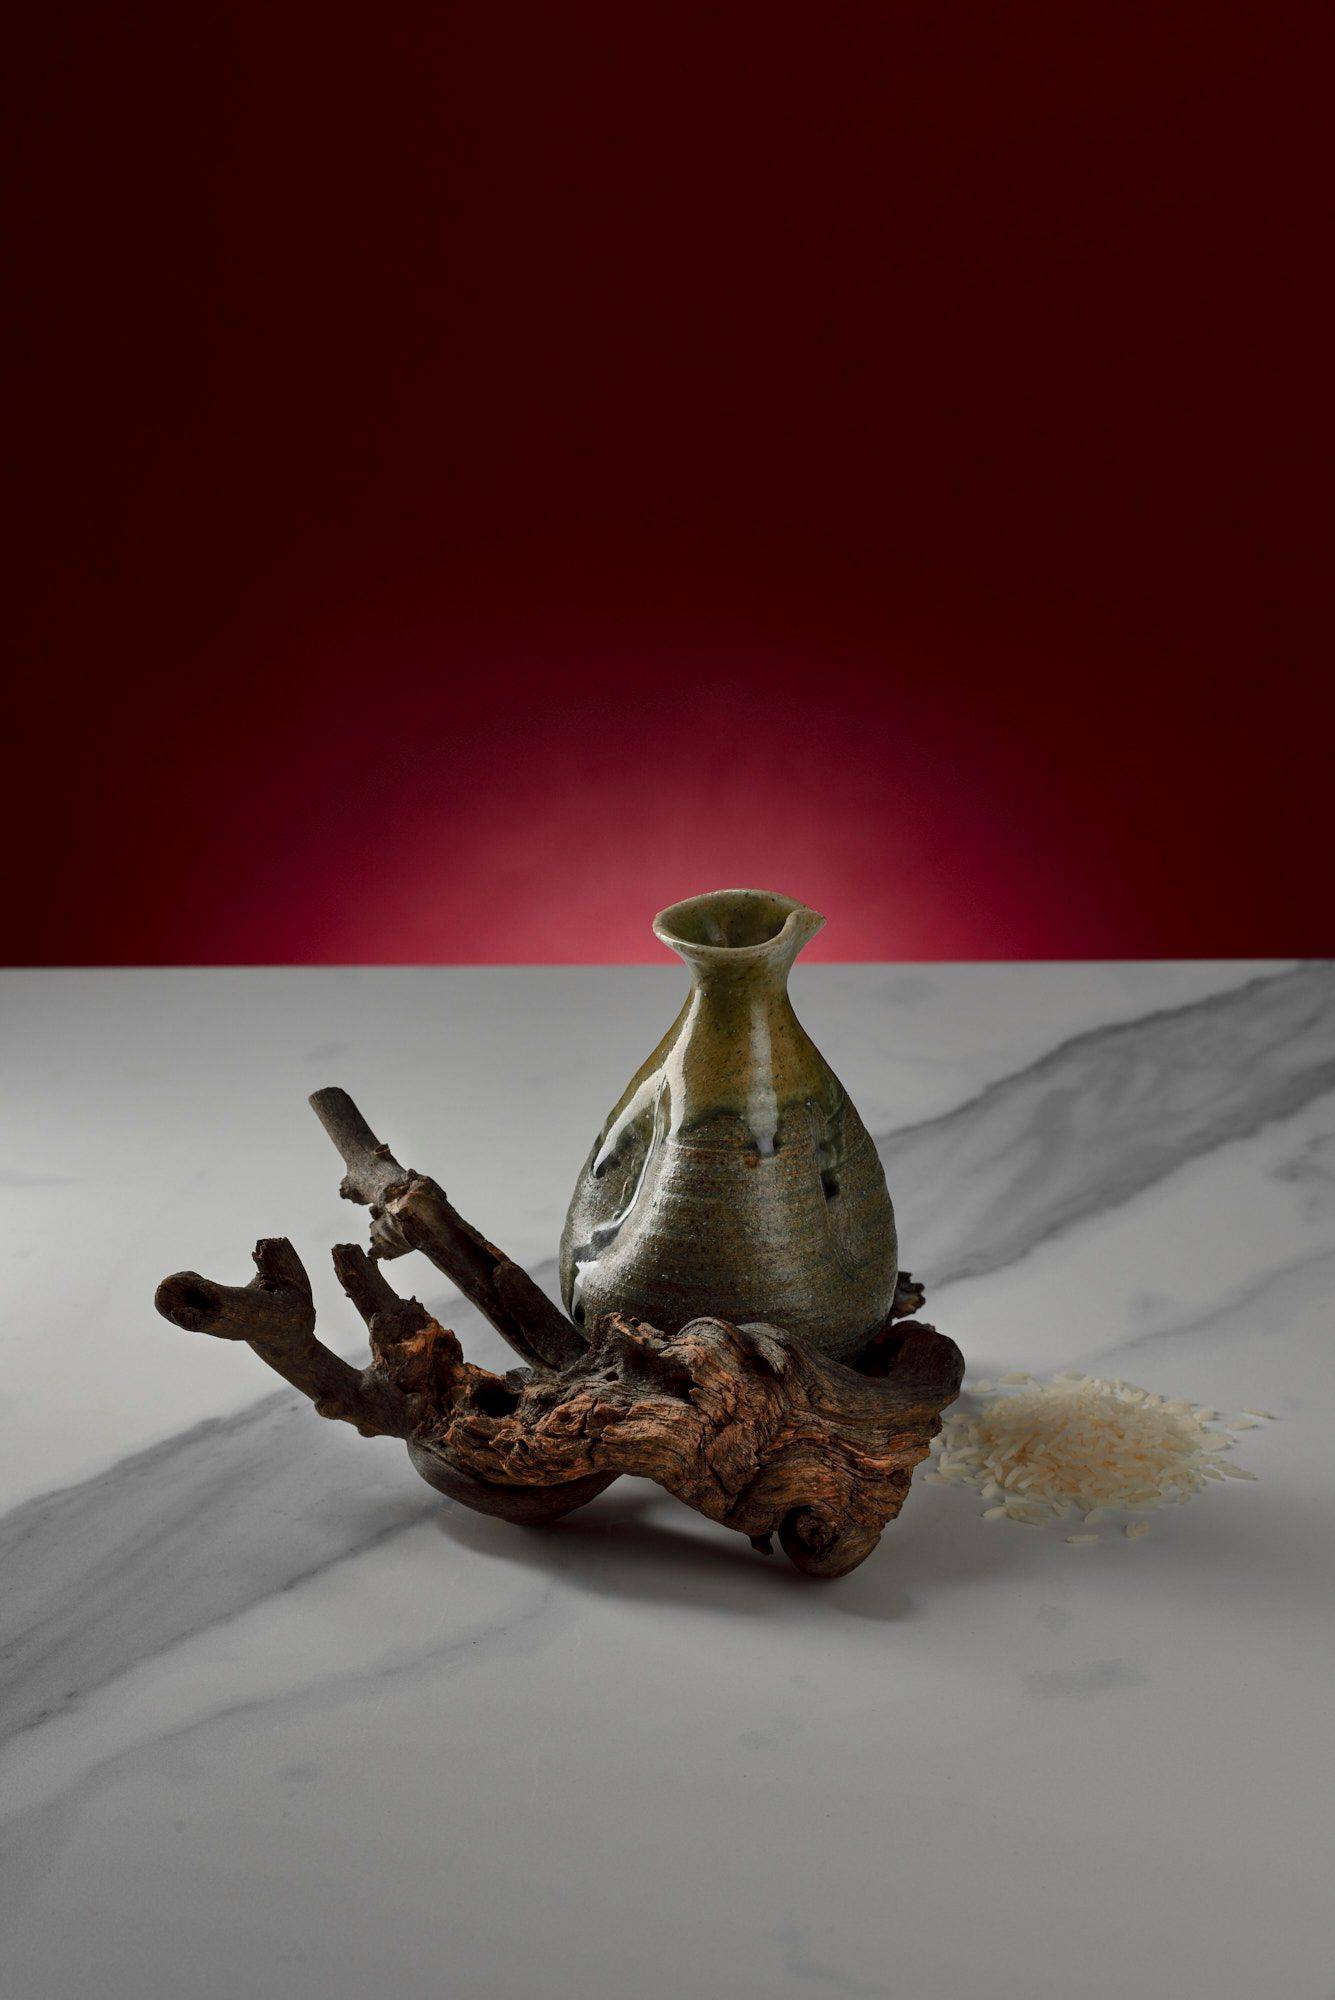 sake and rice on marbled sapienstone top with red background